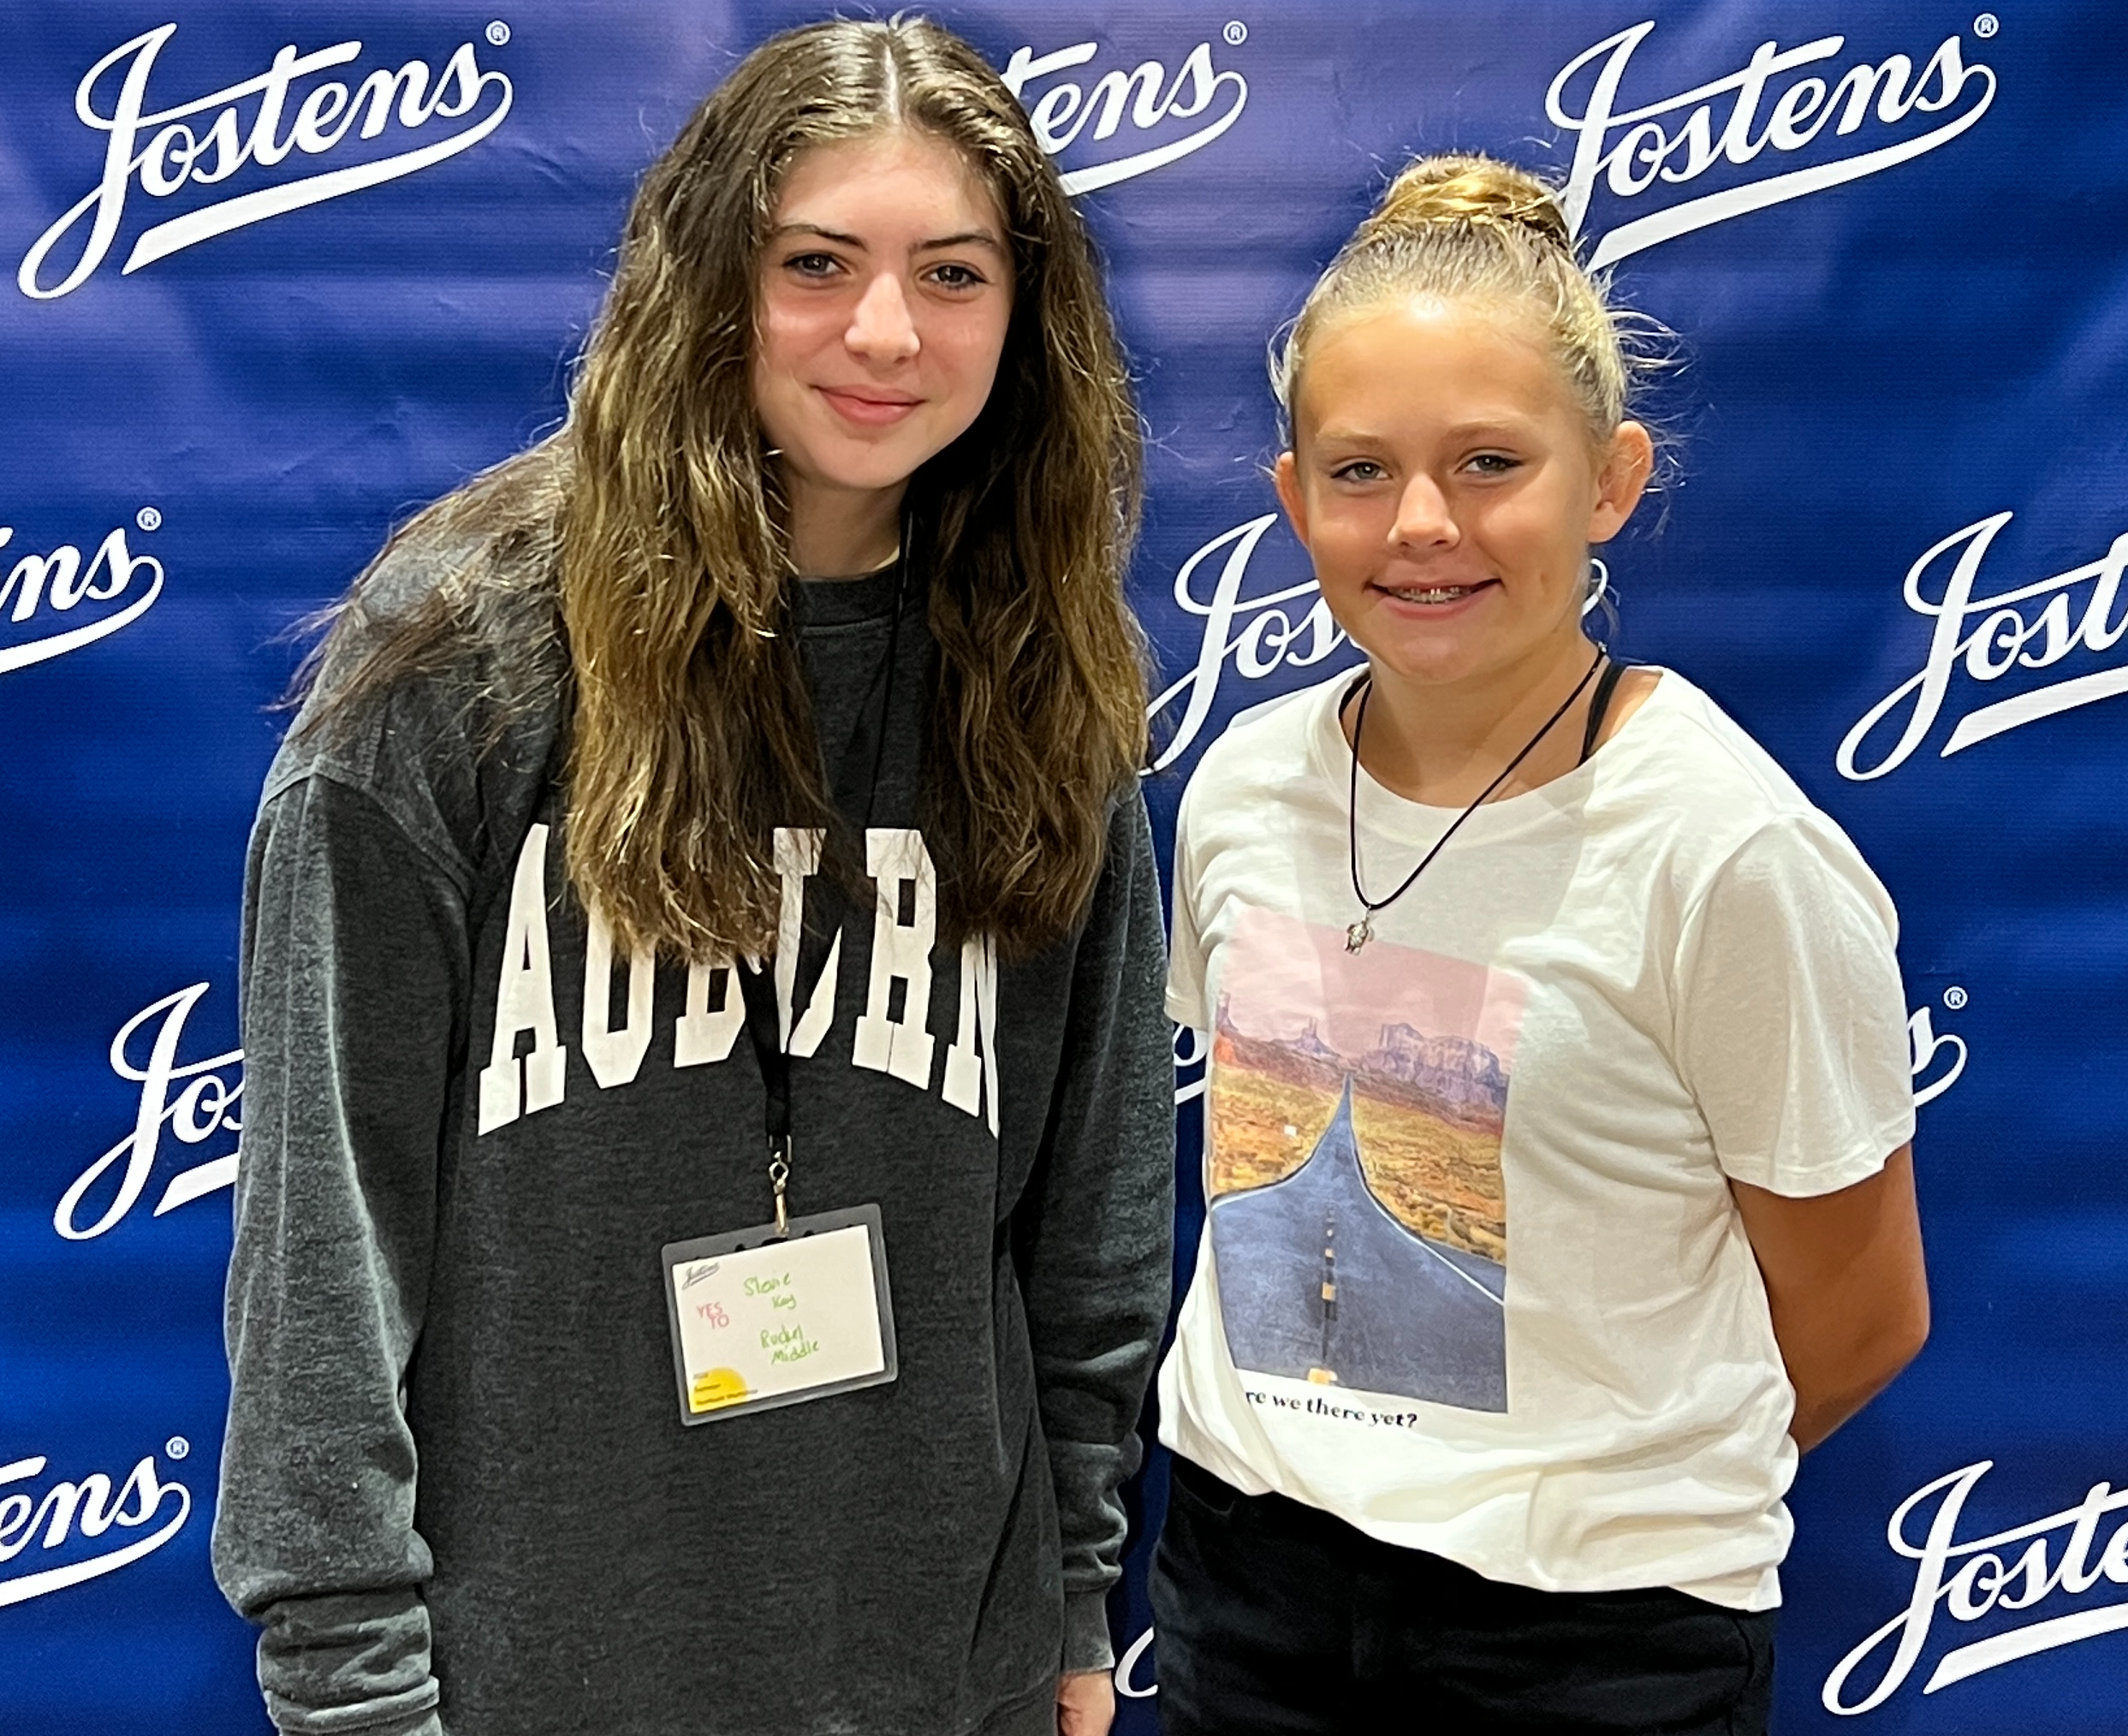 Stevie and Abby at the Josten's Summer Workshop